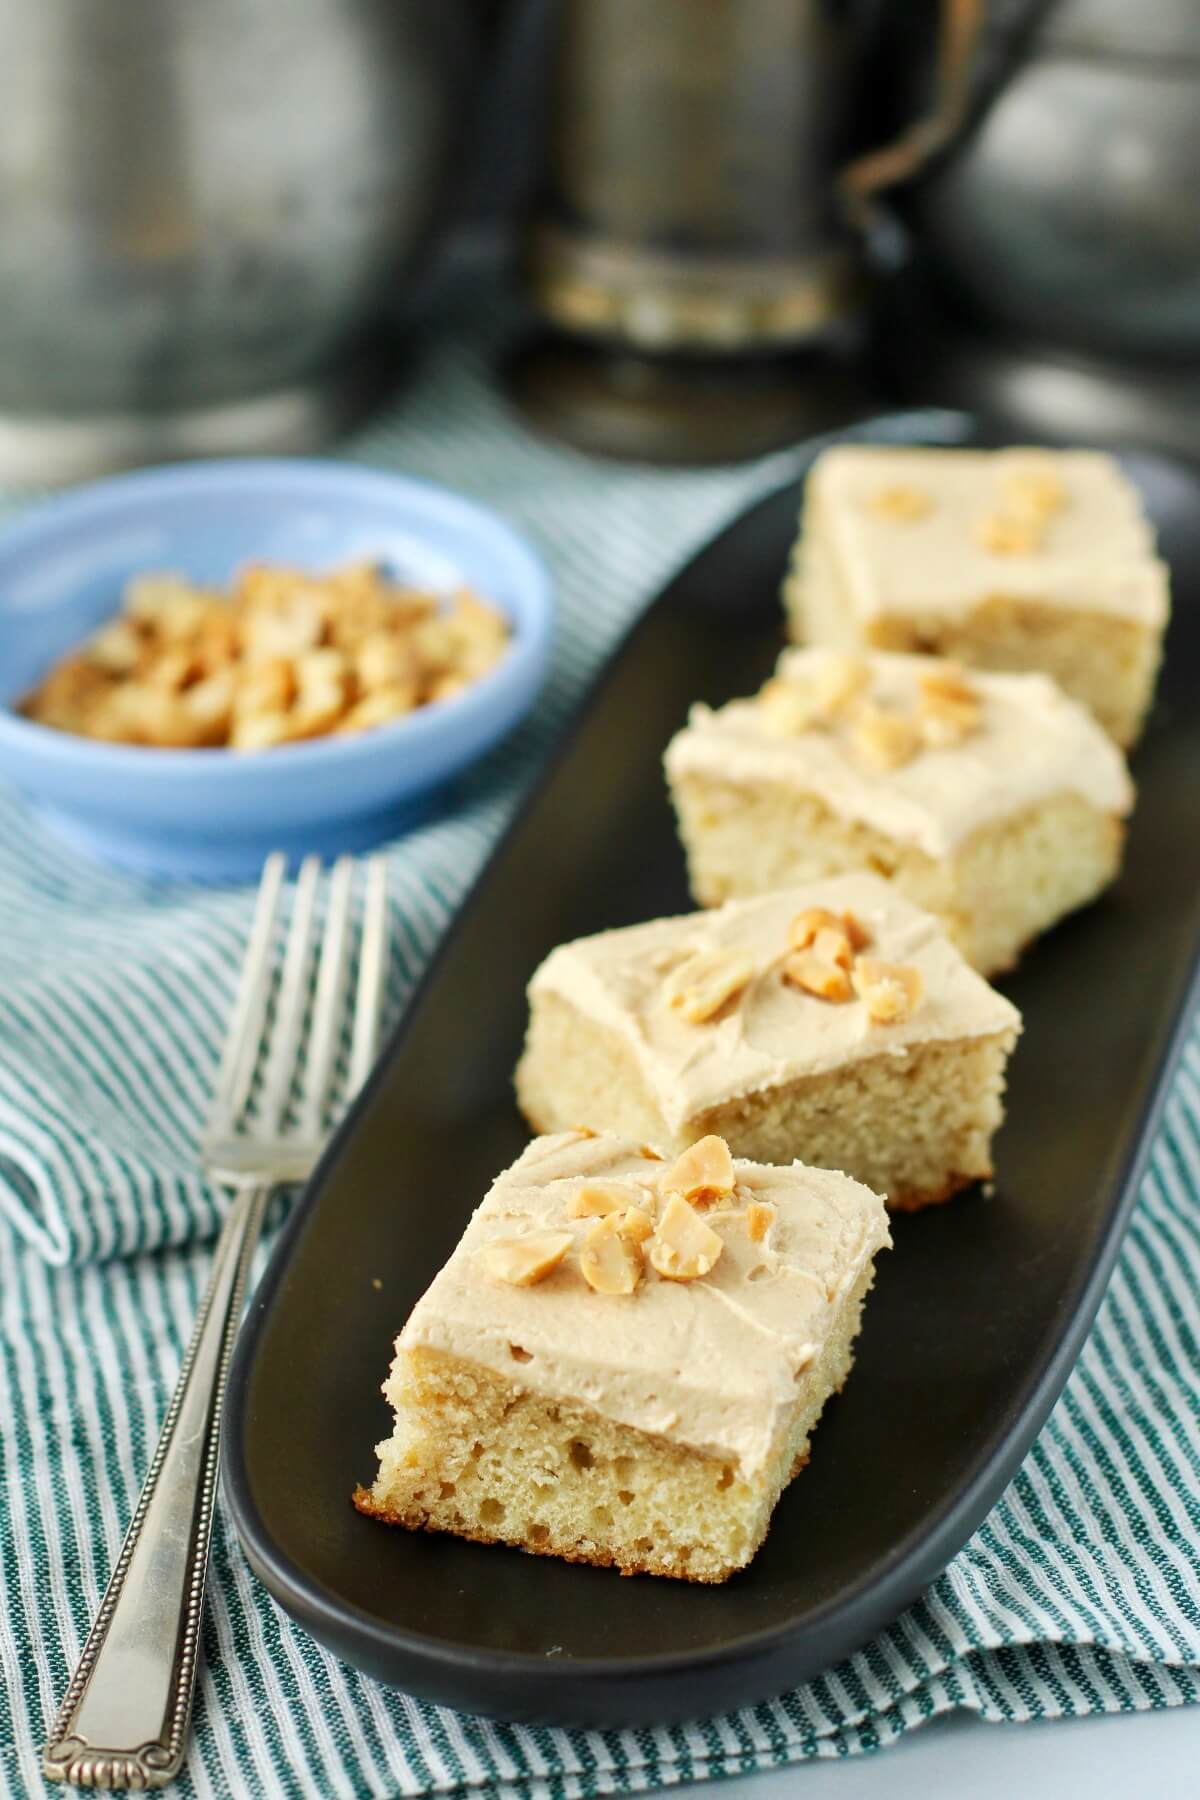 Peanut Butter Snack Cake with creamy peanut butter frosting